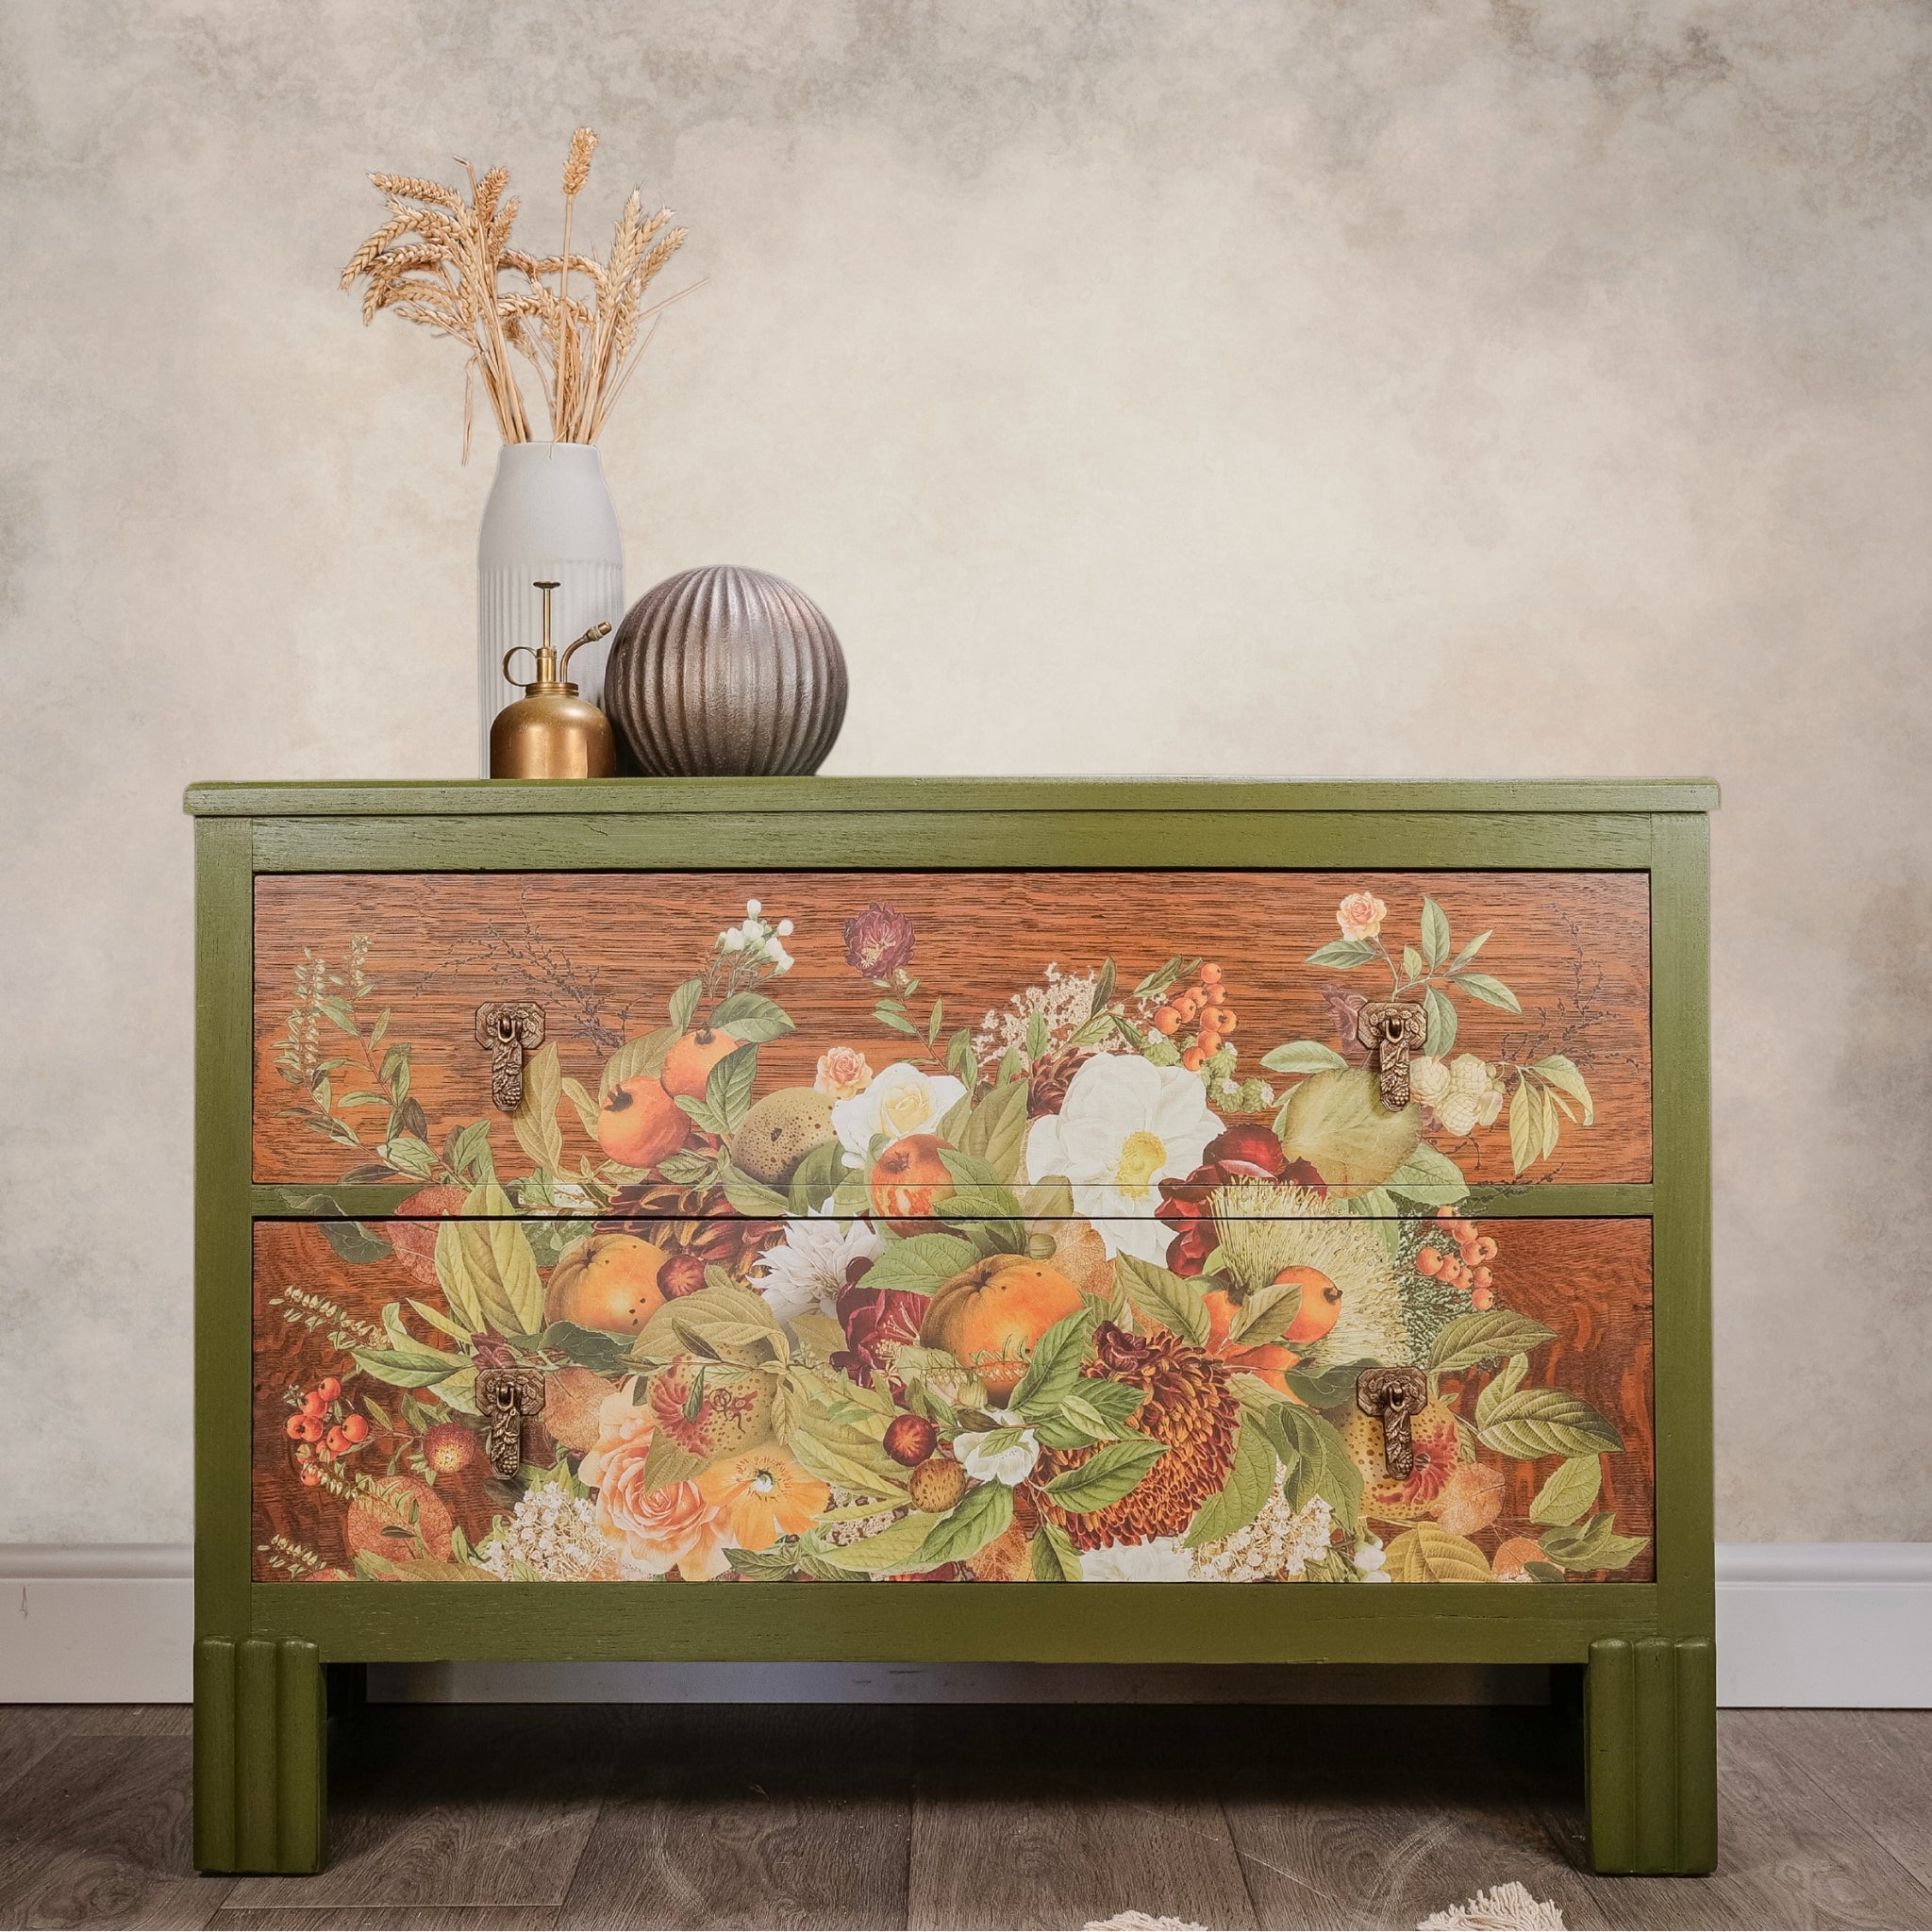 A short 2-drawer dresser is painted olive green with natural wood drawers and features ReDesign with Prima's Harvest Hues transfer on the drawers.